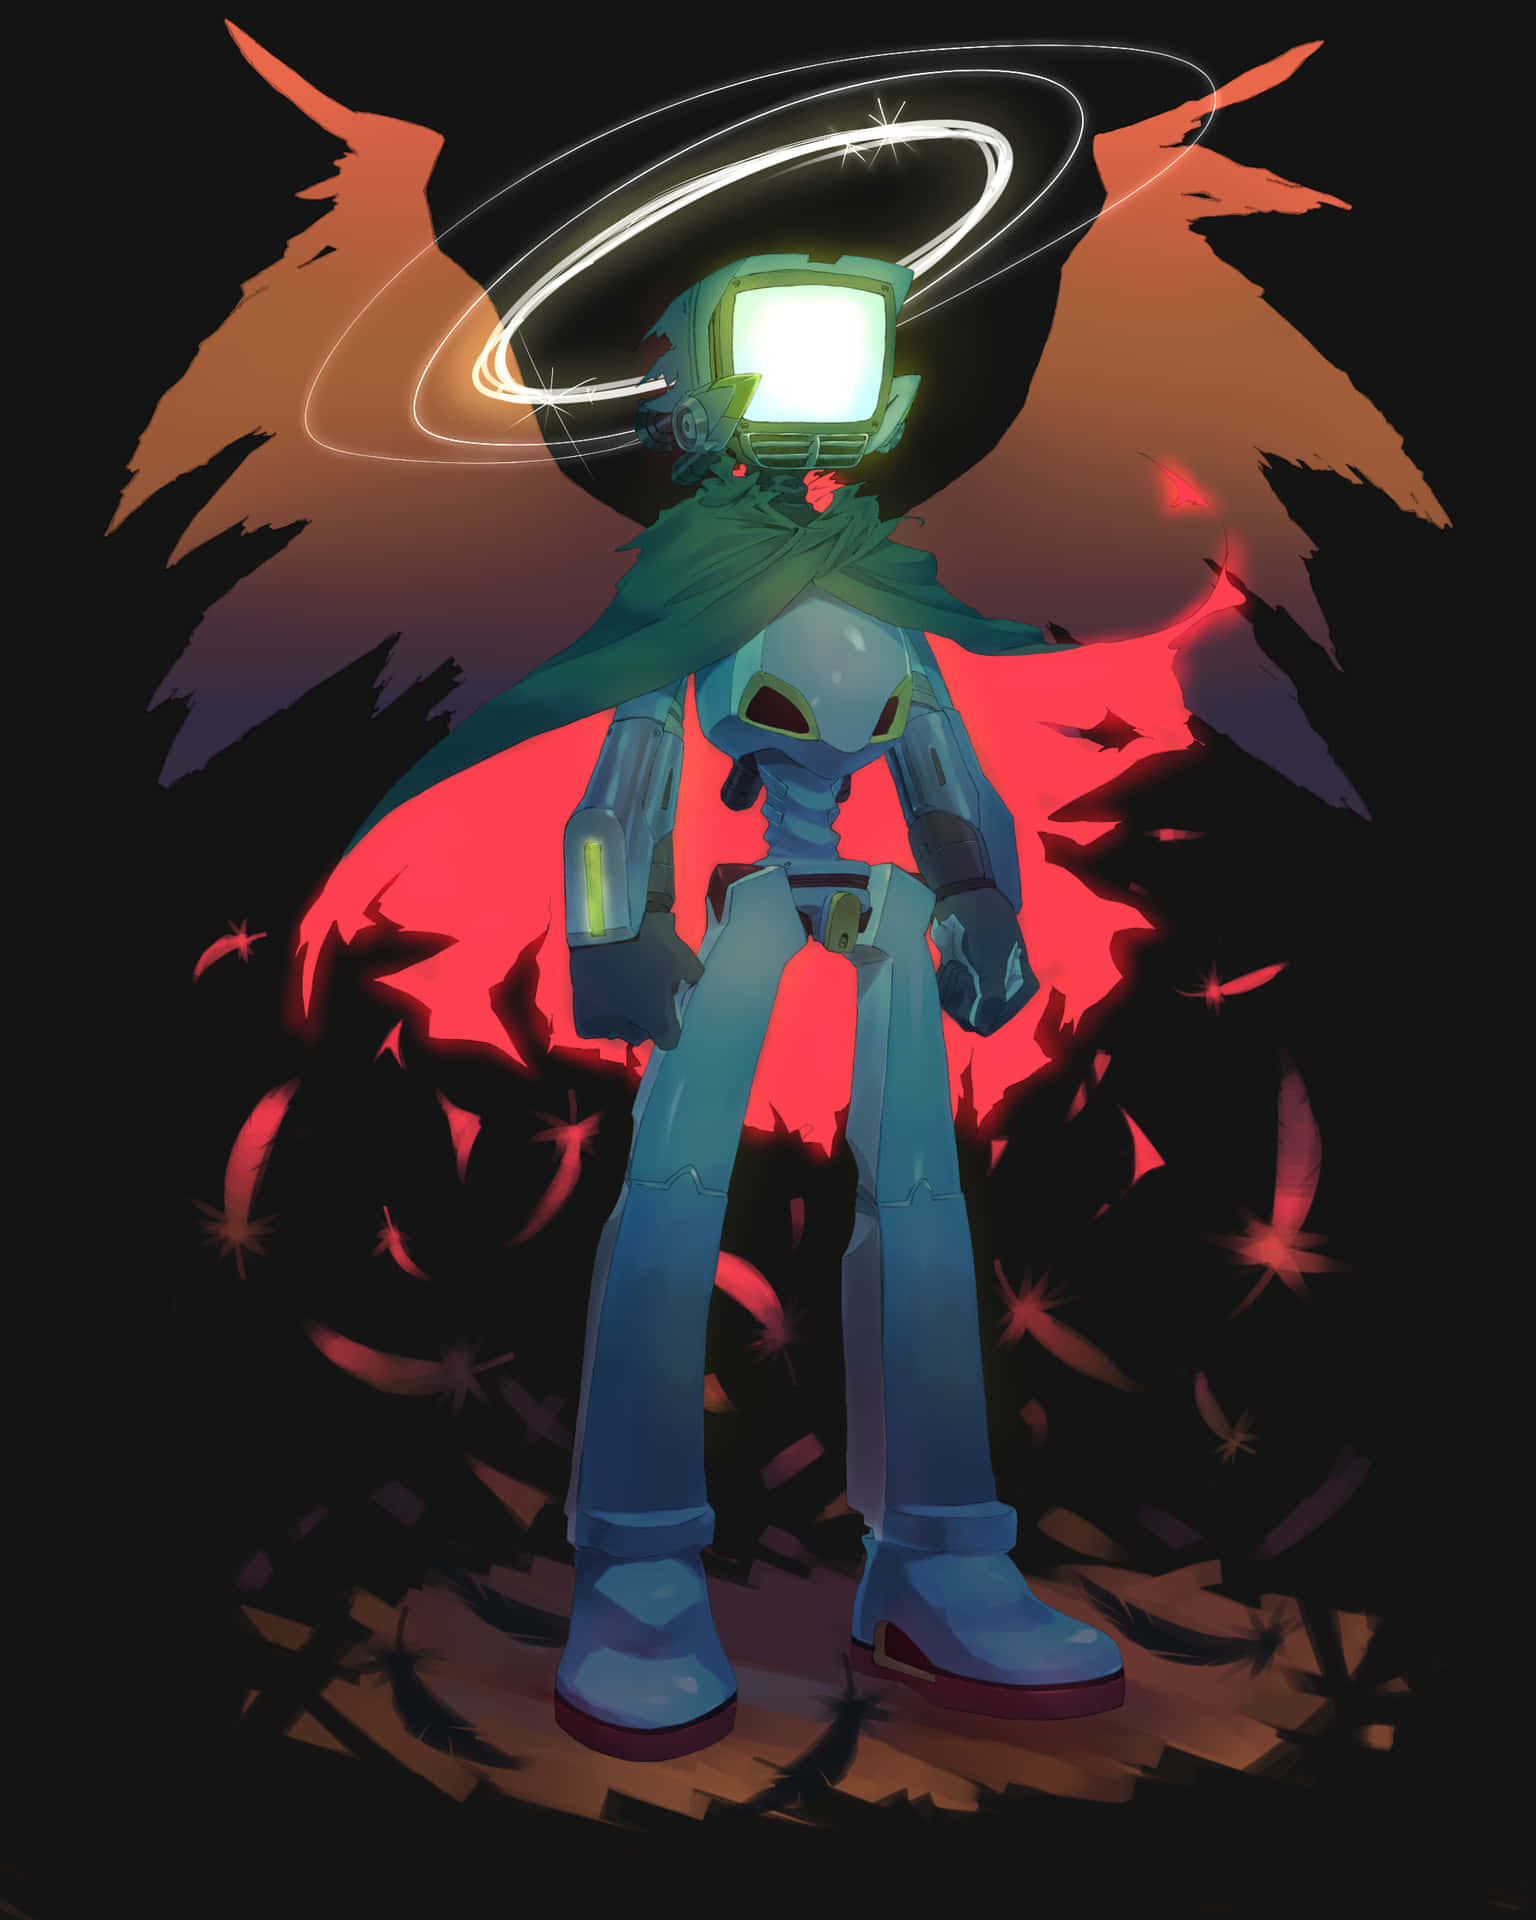 Canti, the iconic robot from FLCL anime series in action. Wallpaper